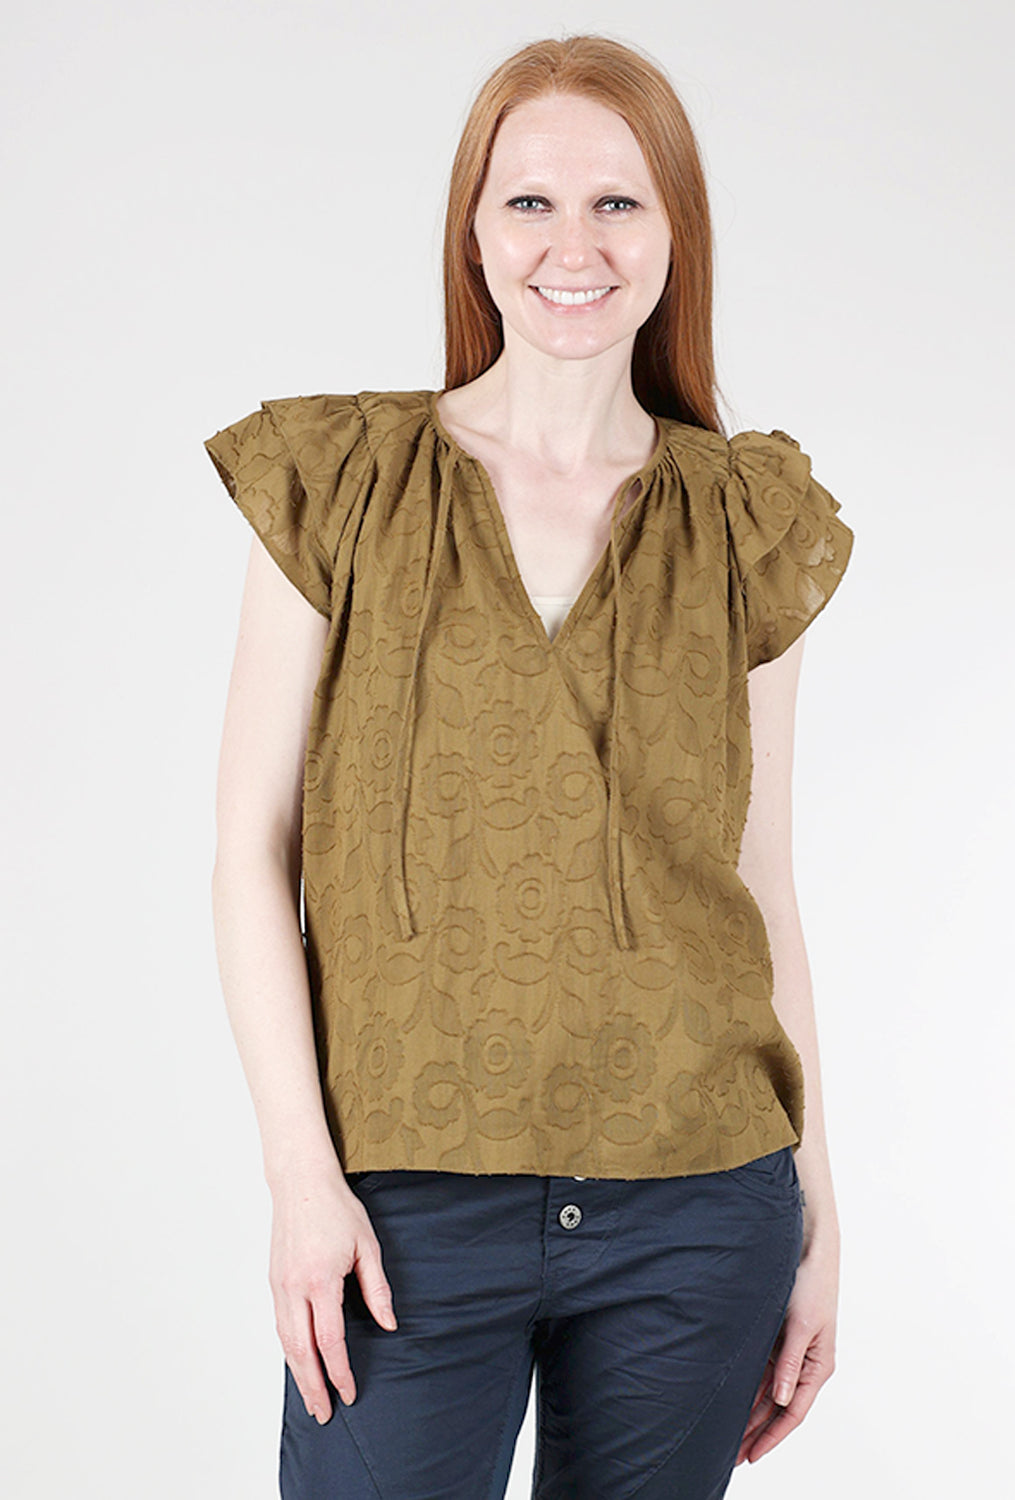 Grade & Gather Cotton Jacquard Ruffle Top, Brown Olive 